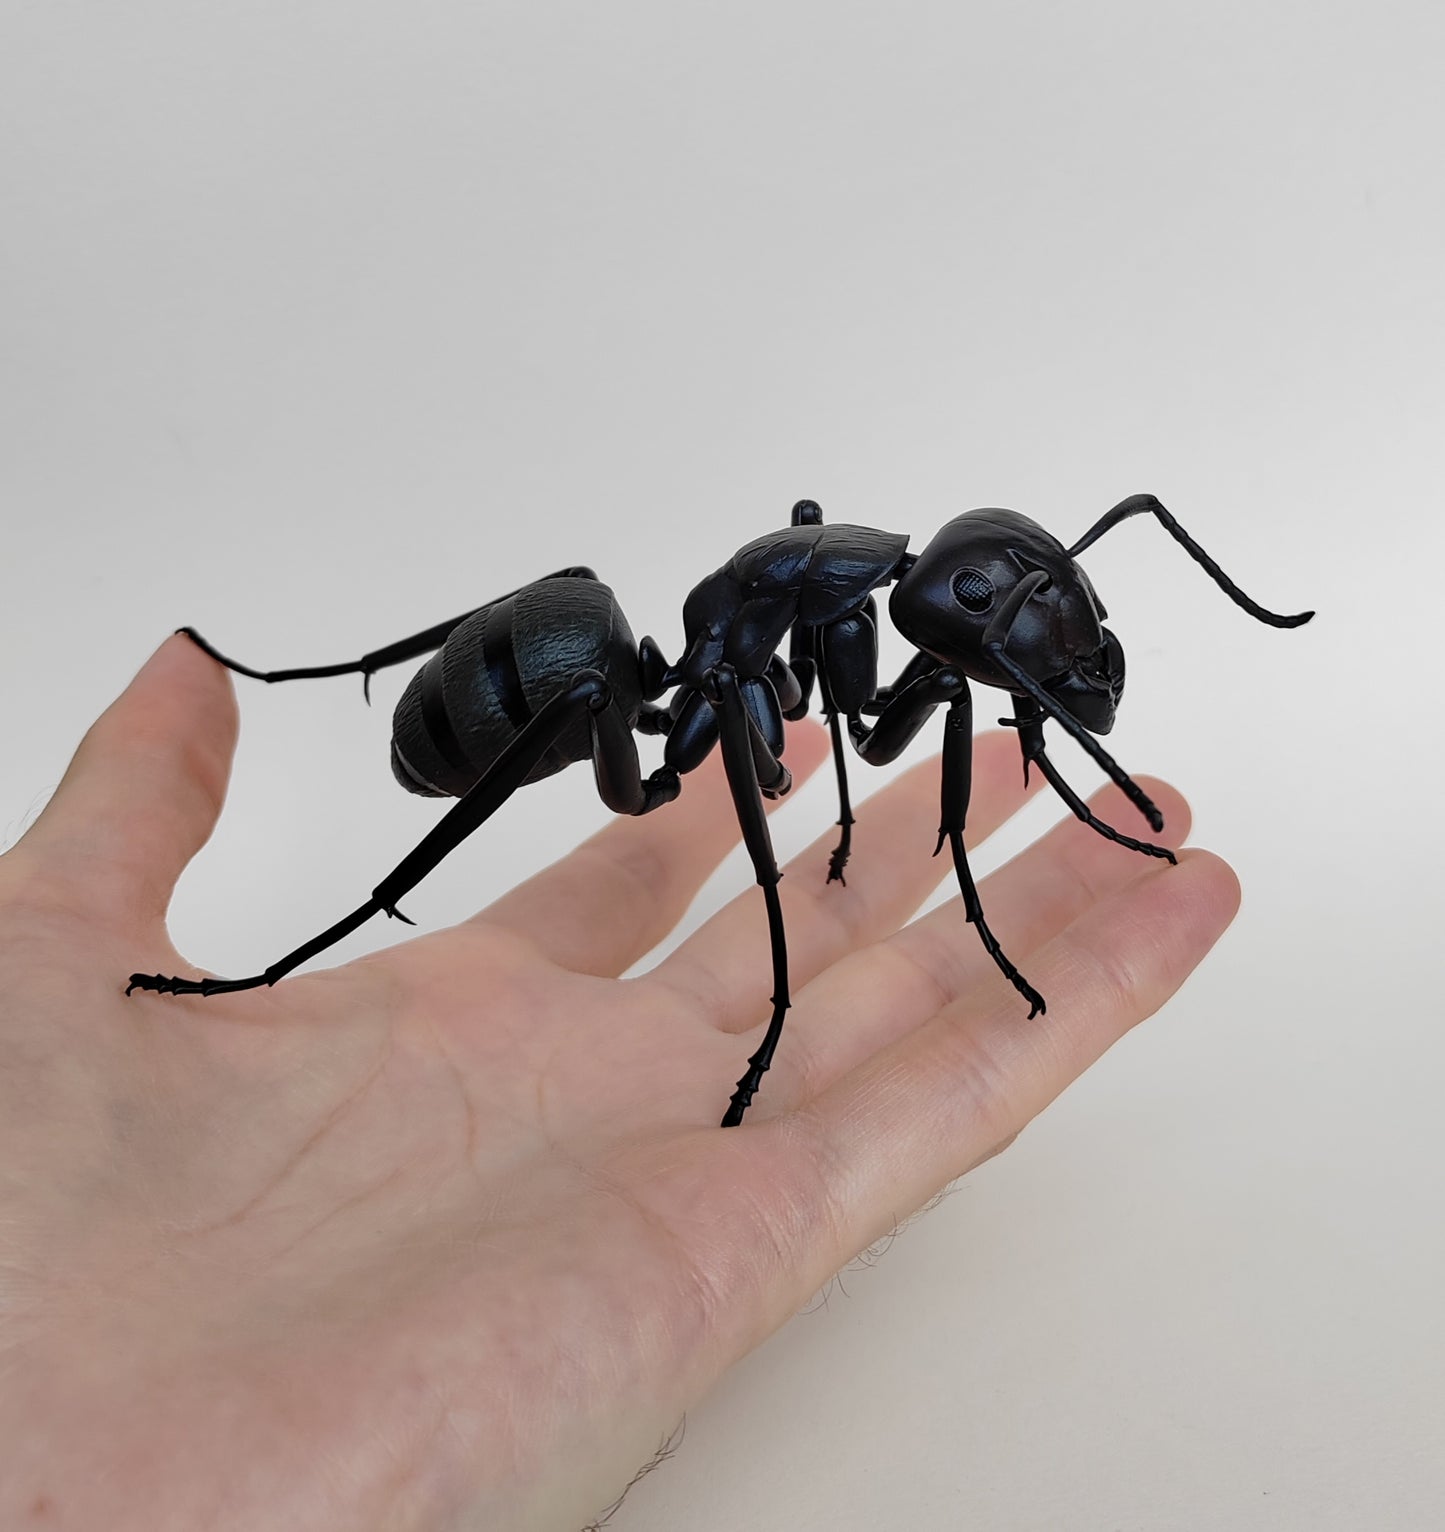 Bullet Ant, Paraponera clavata, Japanese fully posable figure (And other ants!) made by Bandai